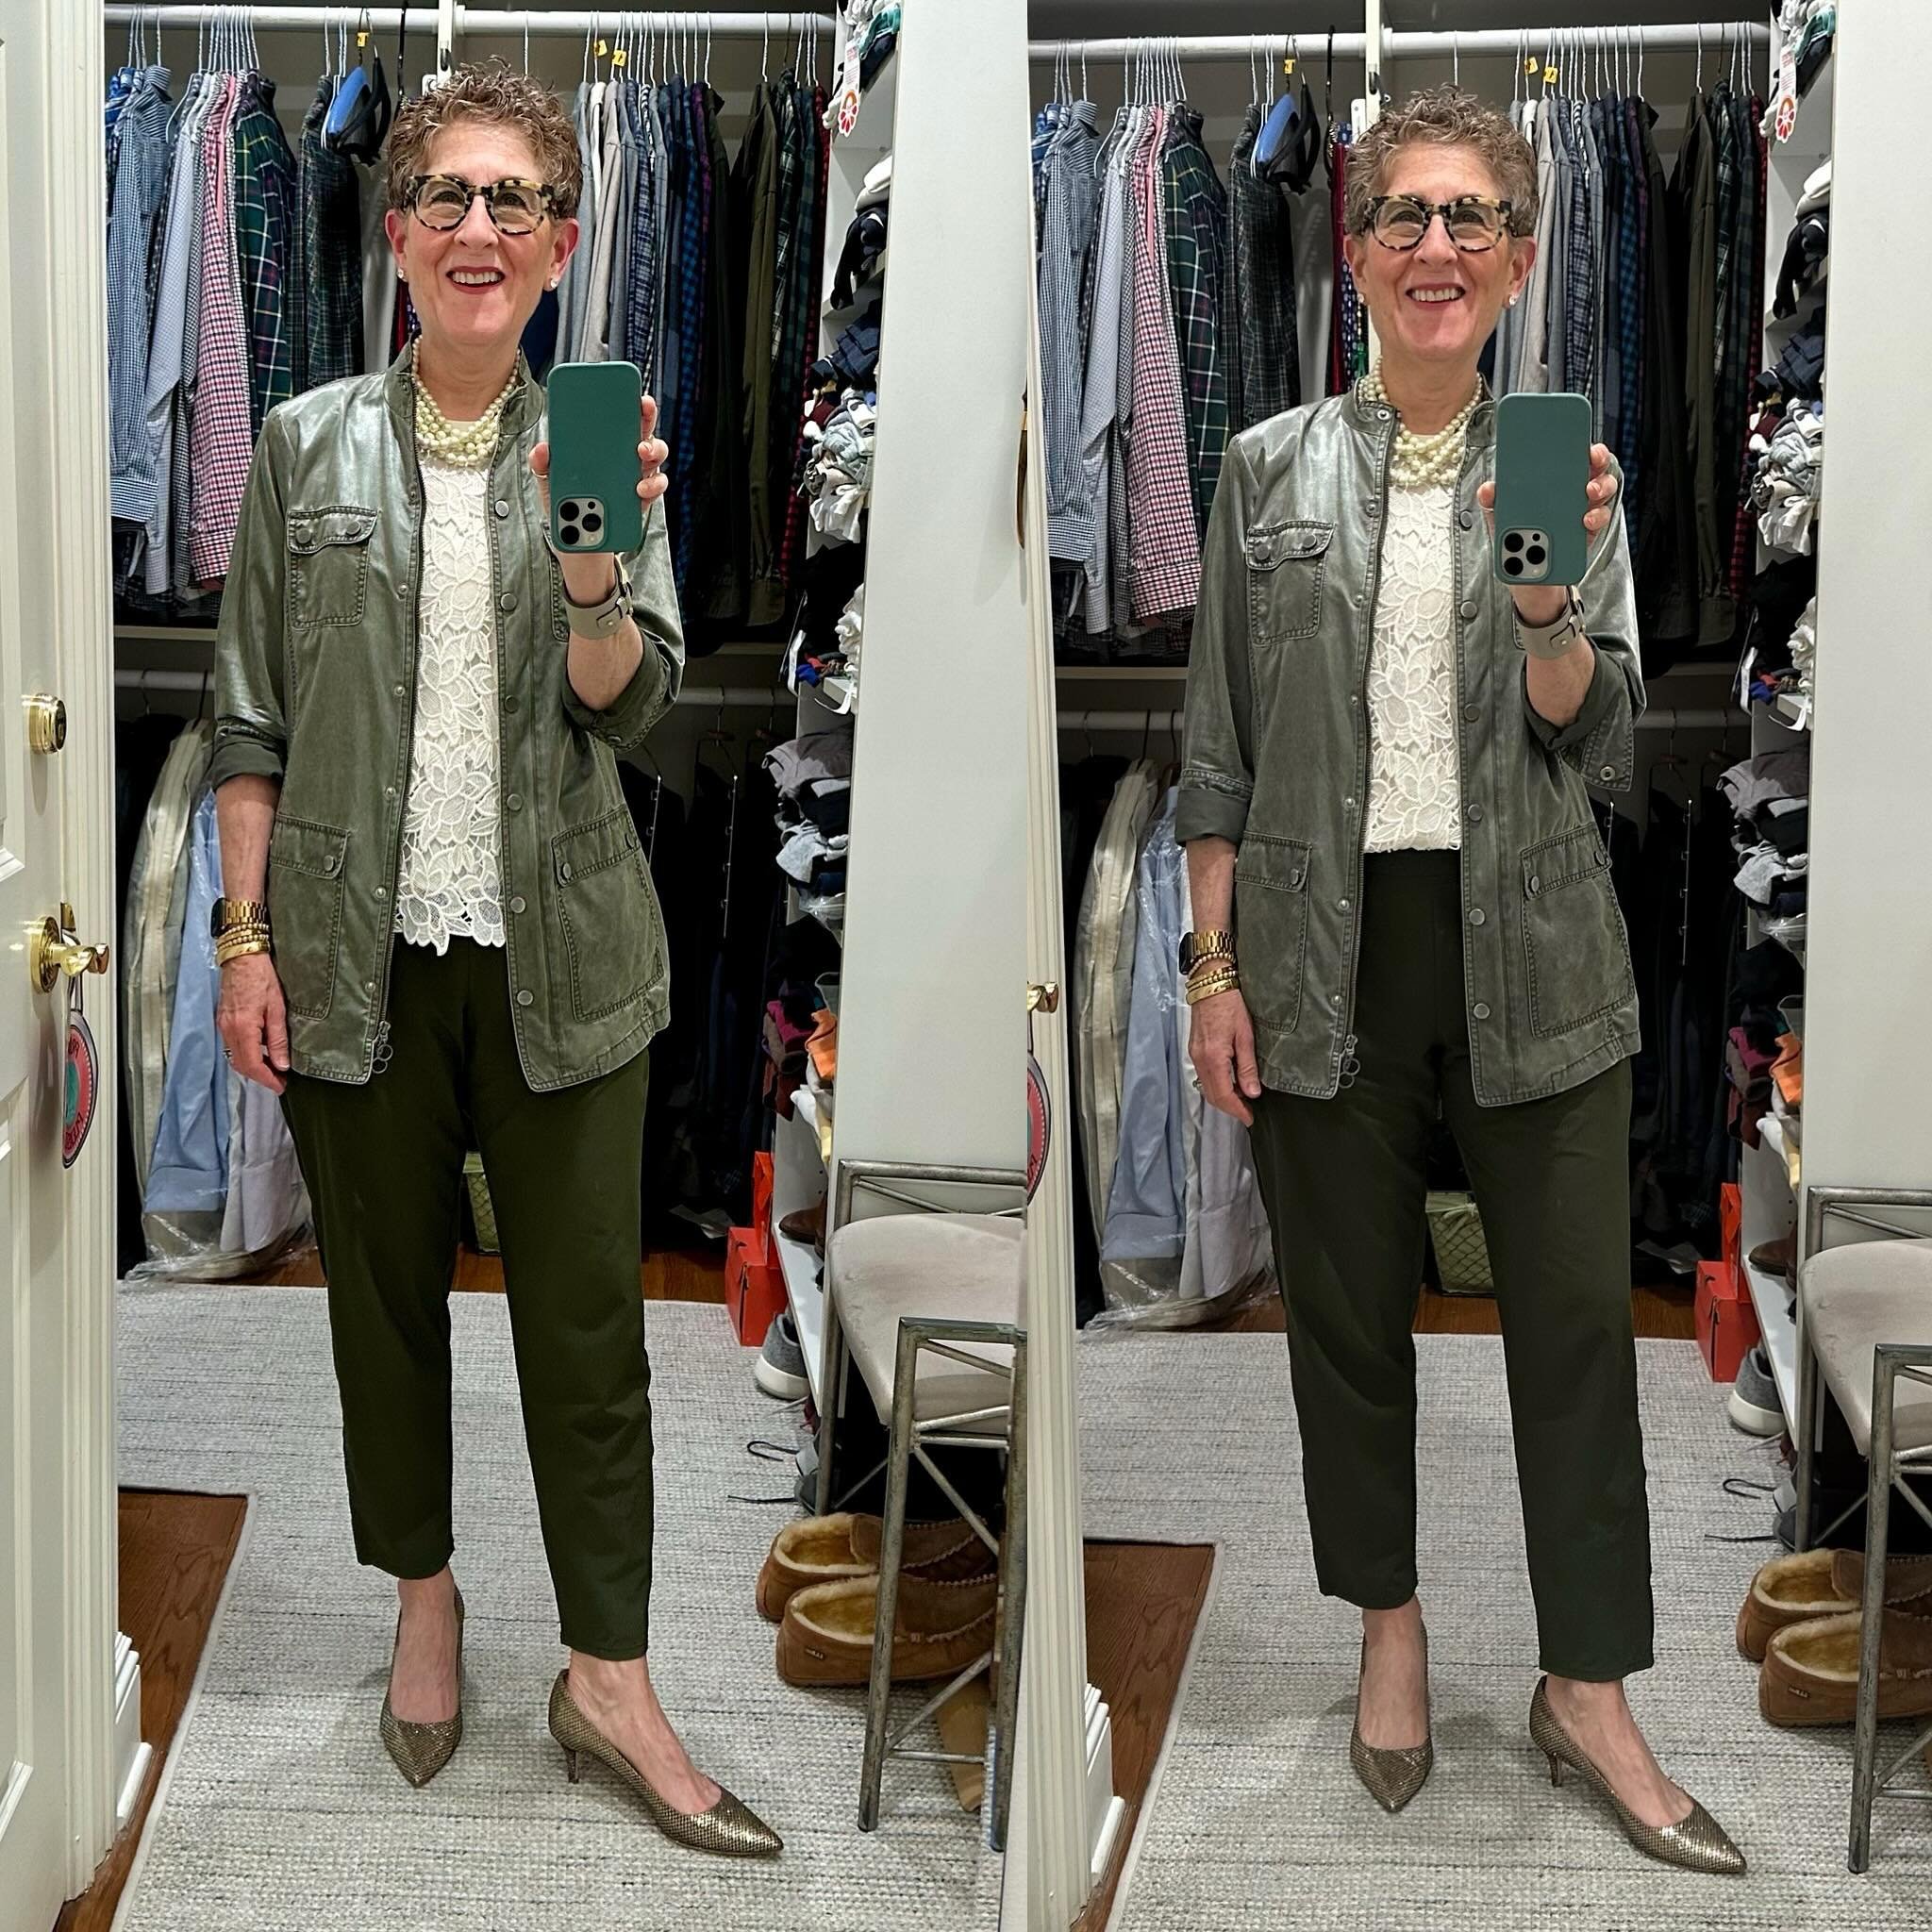 I want to write a little bit about the idea of creating proportion. Getting the right proportion in a look can make all the difference. Get it right, and it&rsquo;s flattering. It will make the outfit look great. Get it wrong and it&rsquo;s *not* and